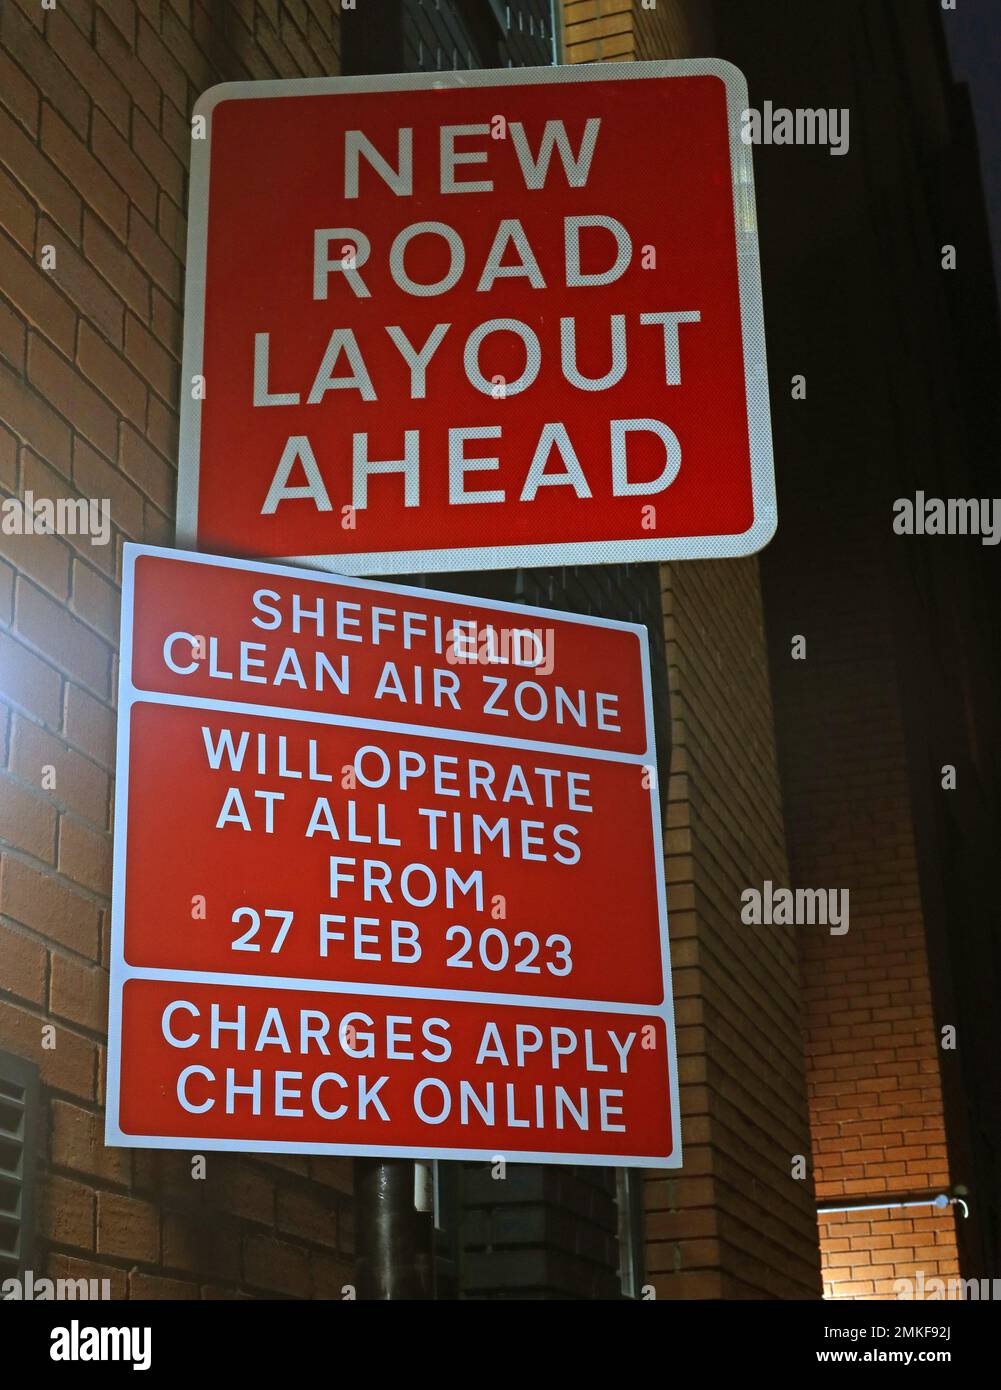 Sheffield Clean Air Zone CAZ, starting from 27 Feb 2023 , sign Stock Photo